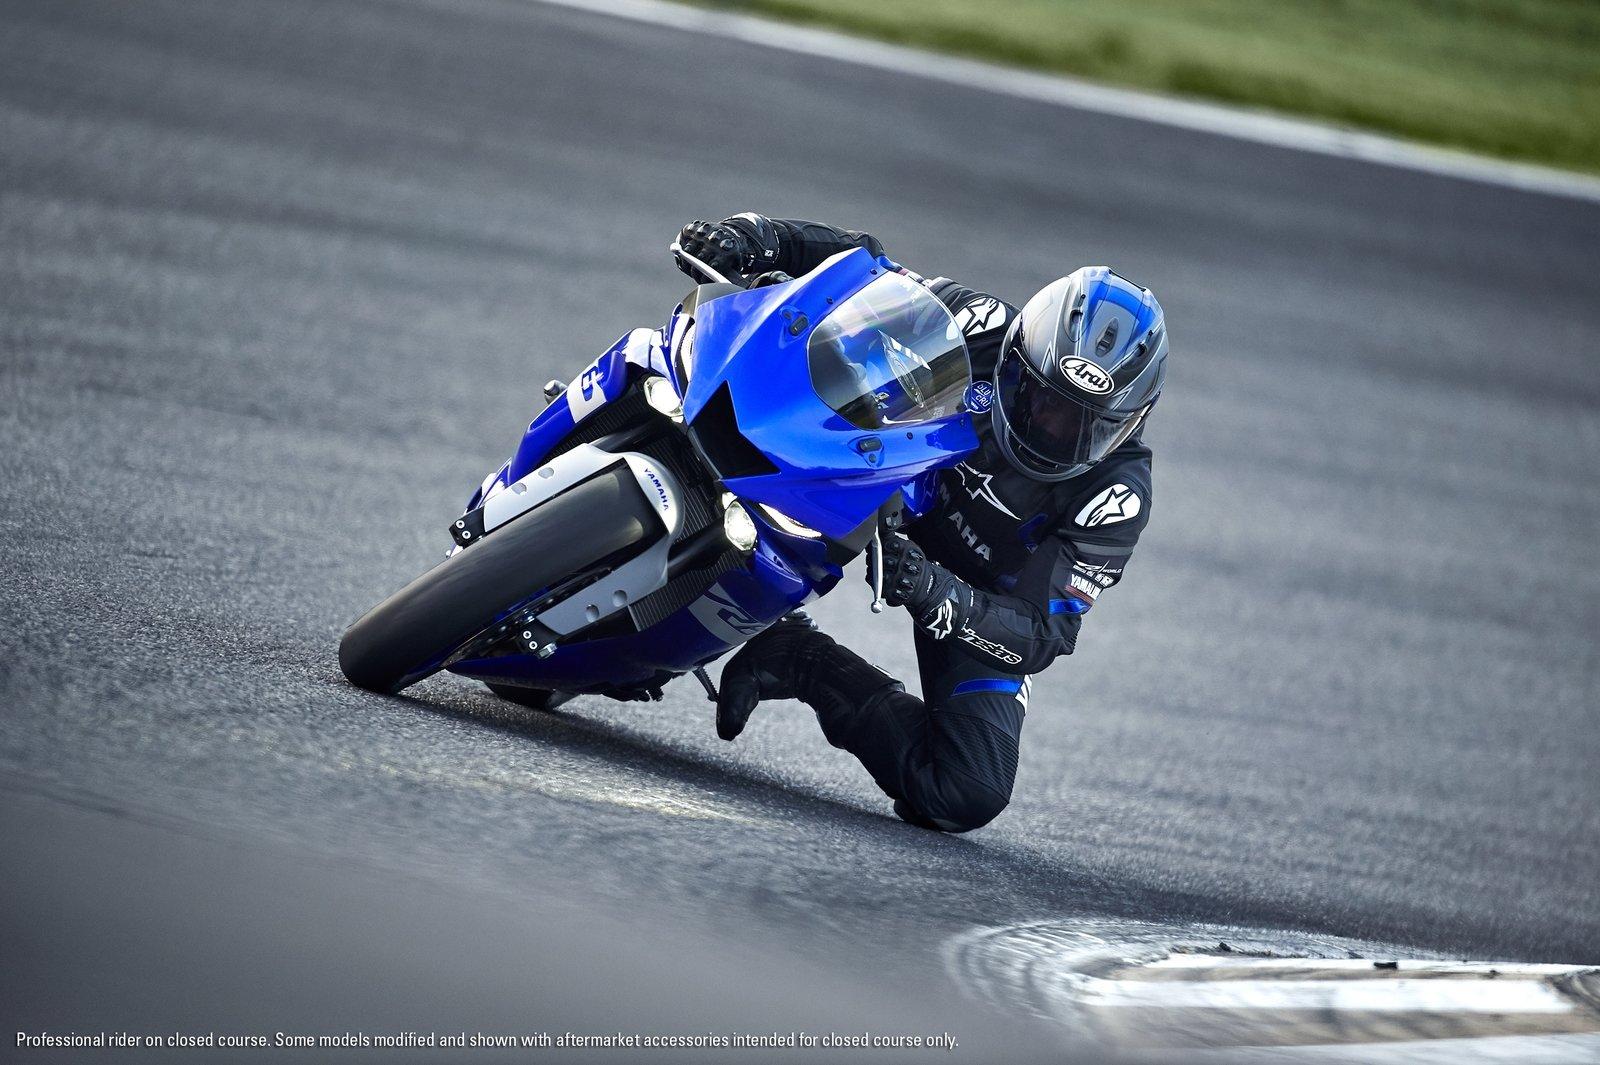 2020 Yamaha YZF R6 Picture, Photo, Wallpaper And Videos